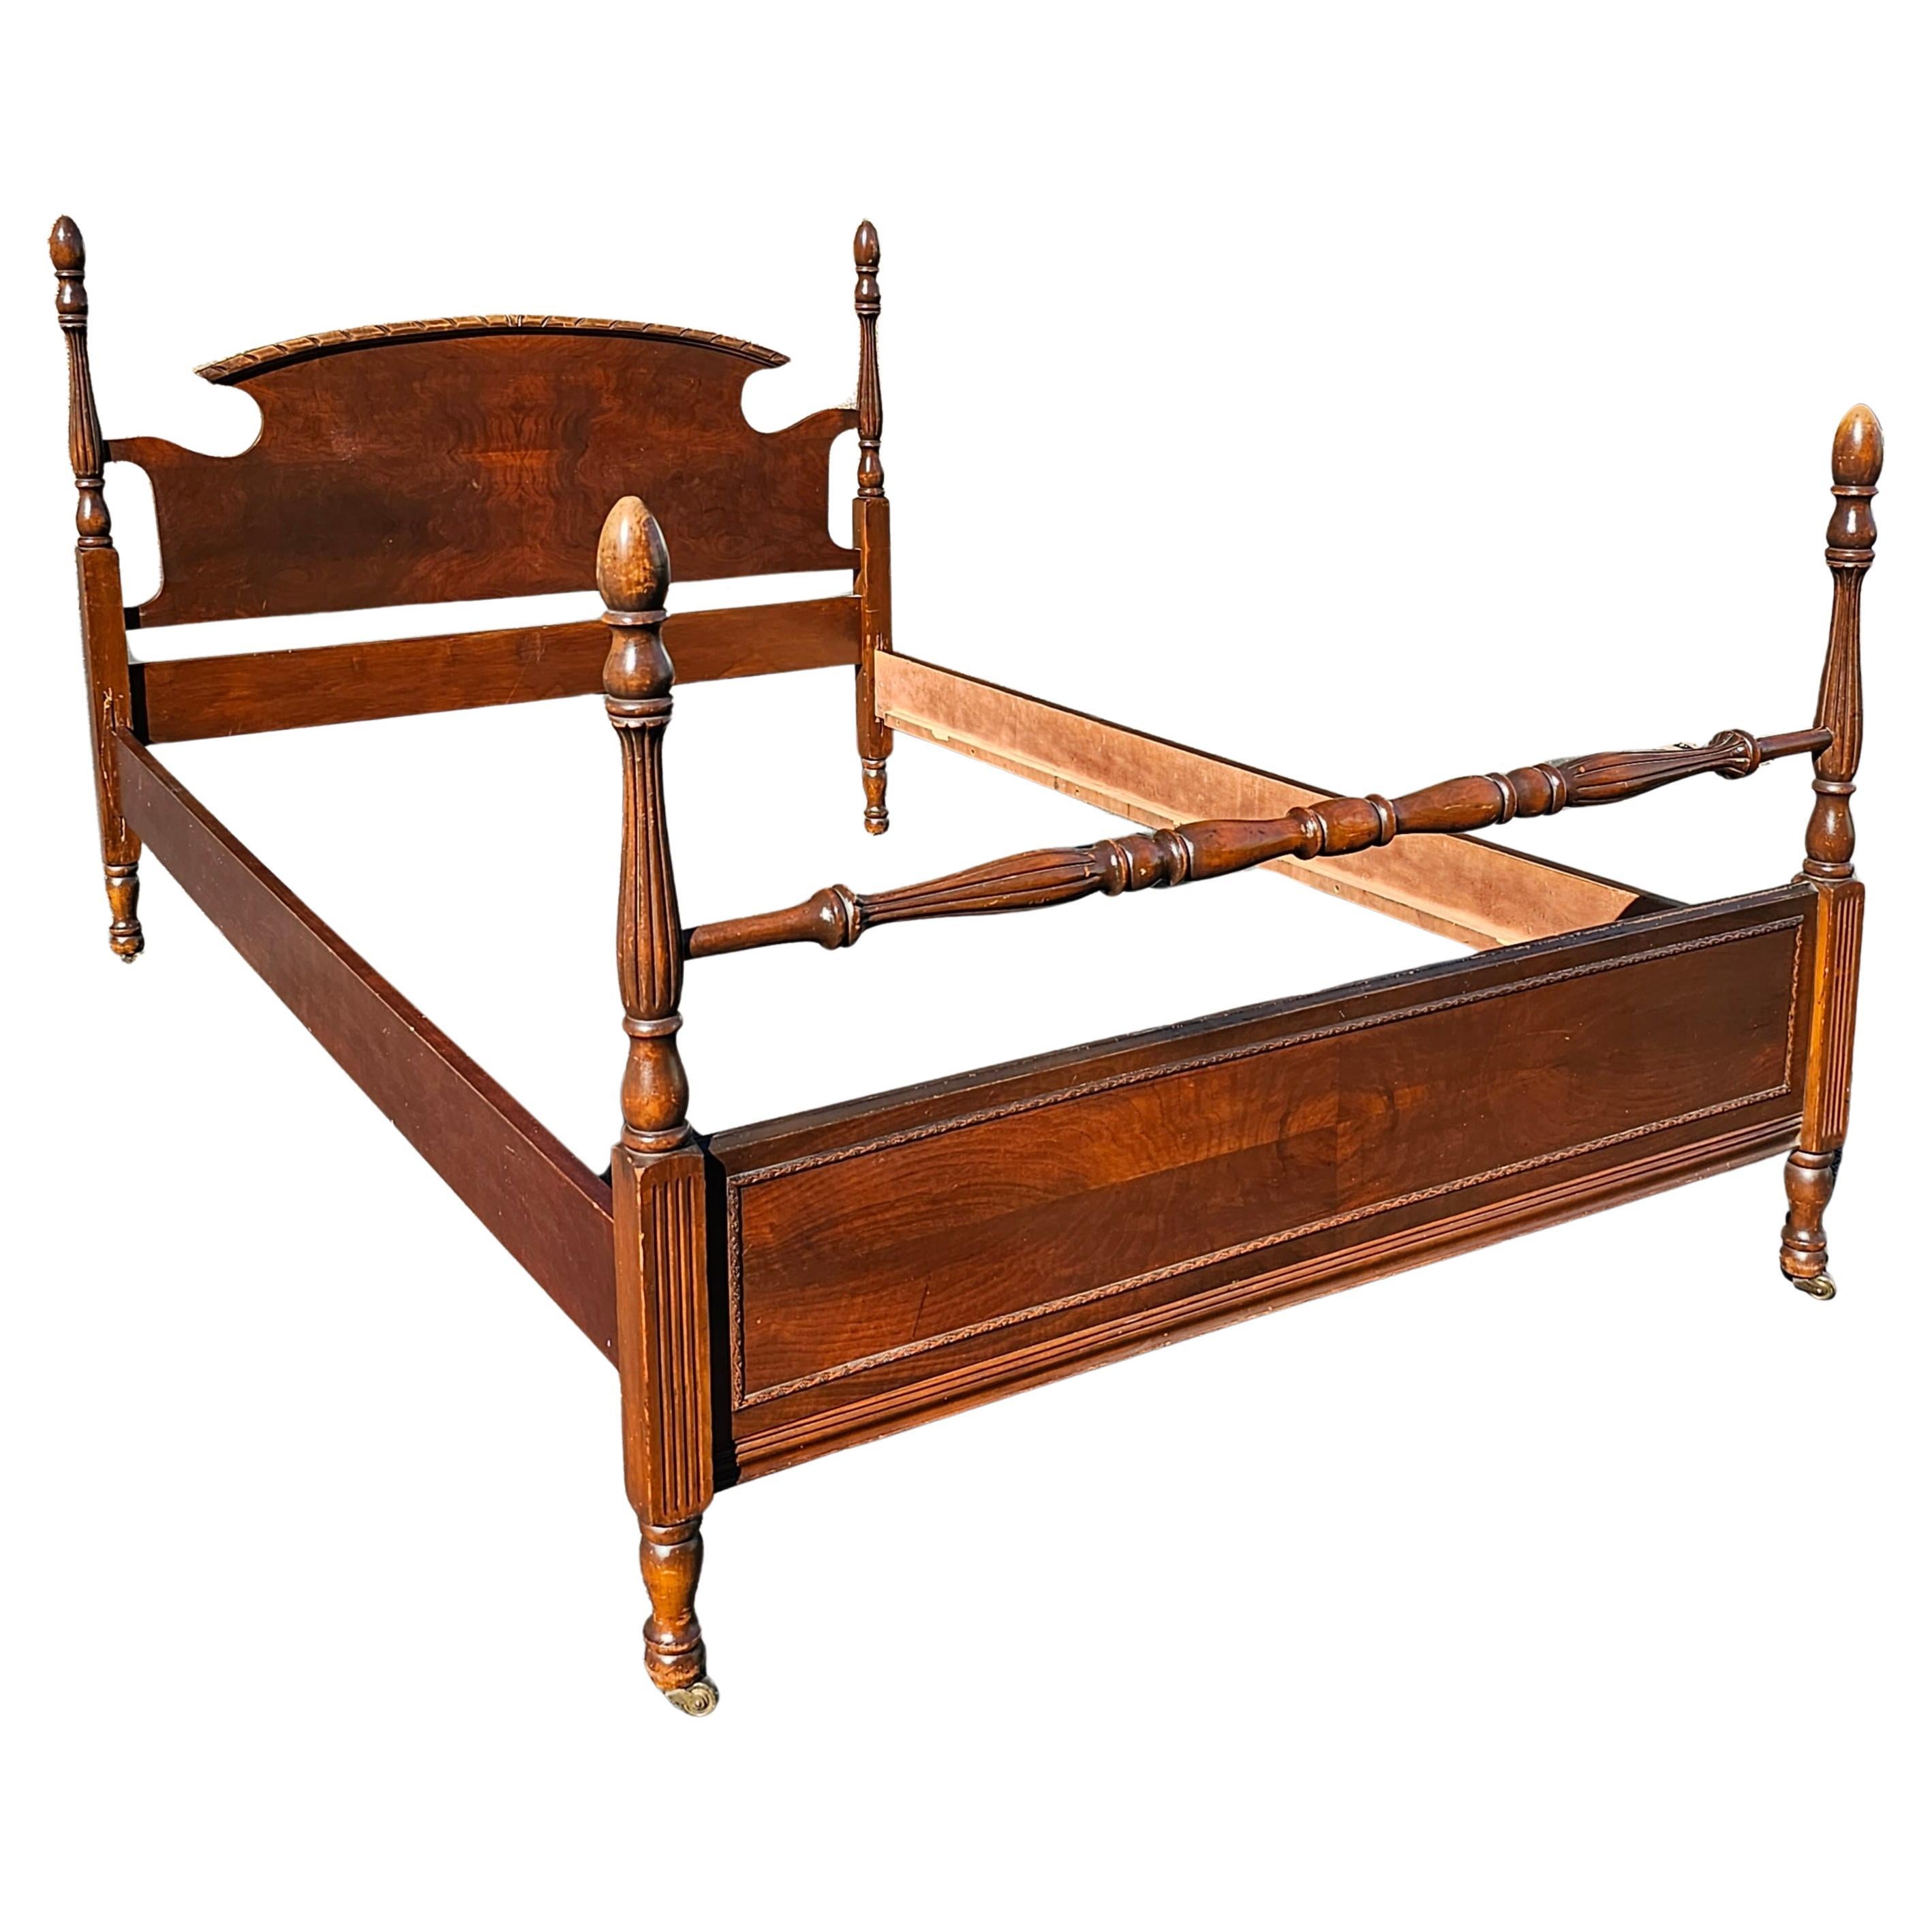 1940's American Classical Style Mahogany Full Size Bed (Lit complet en acajou)